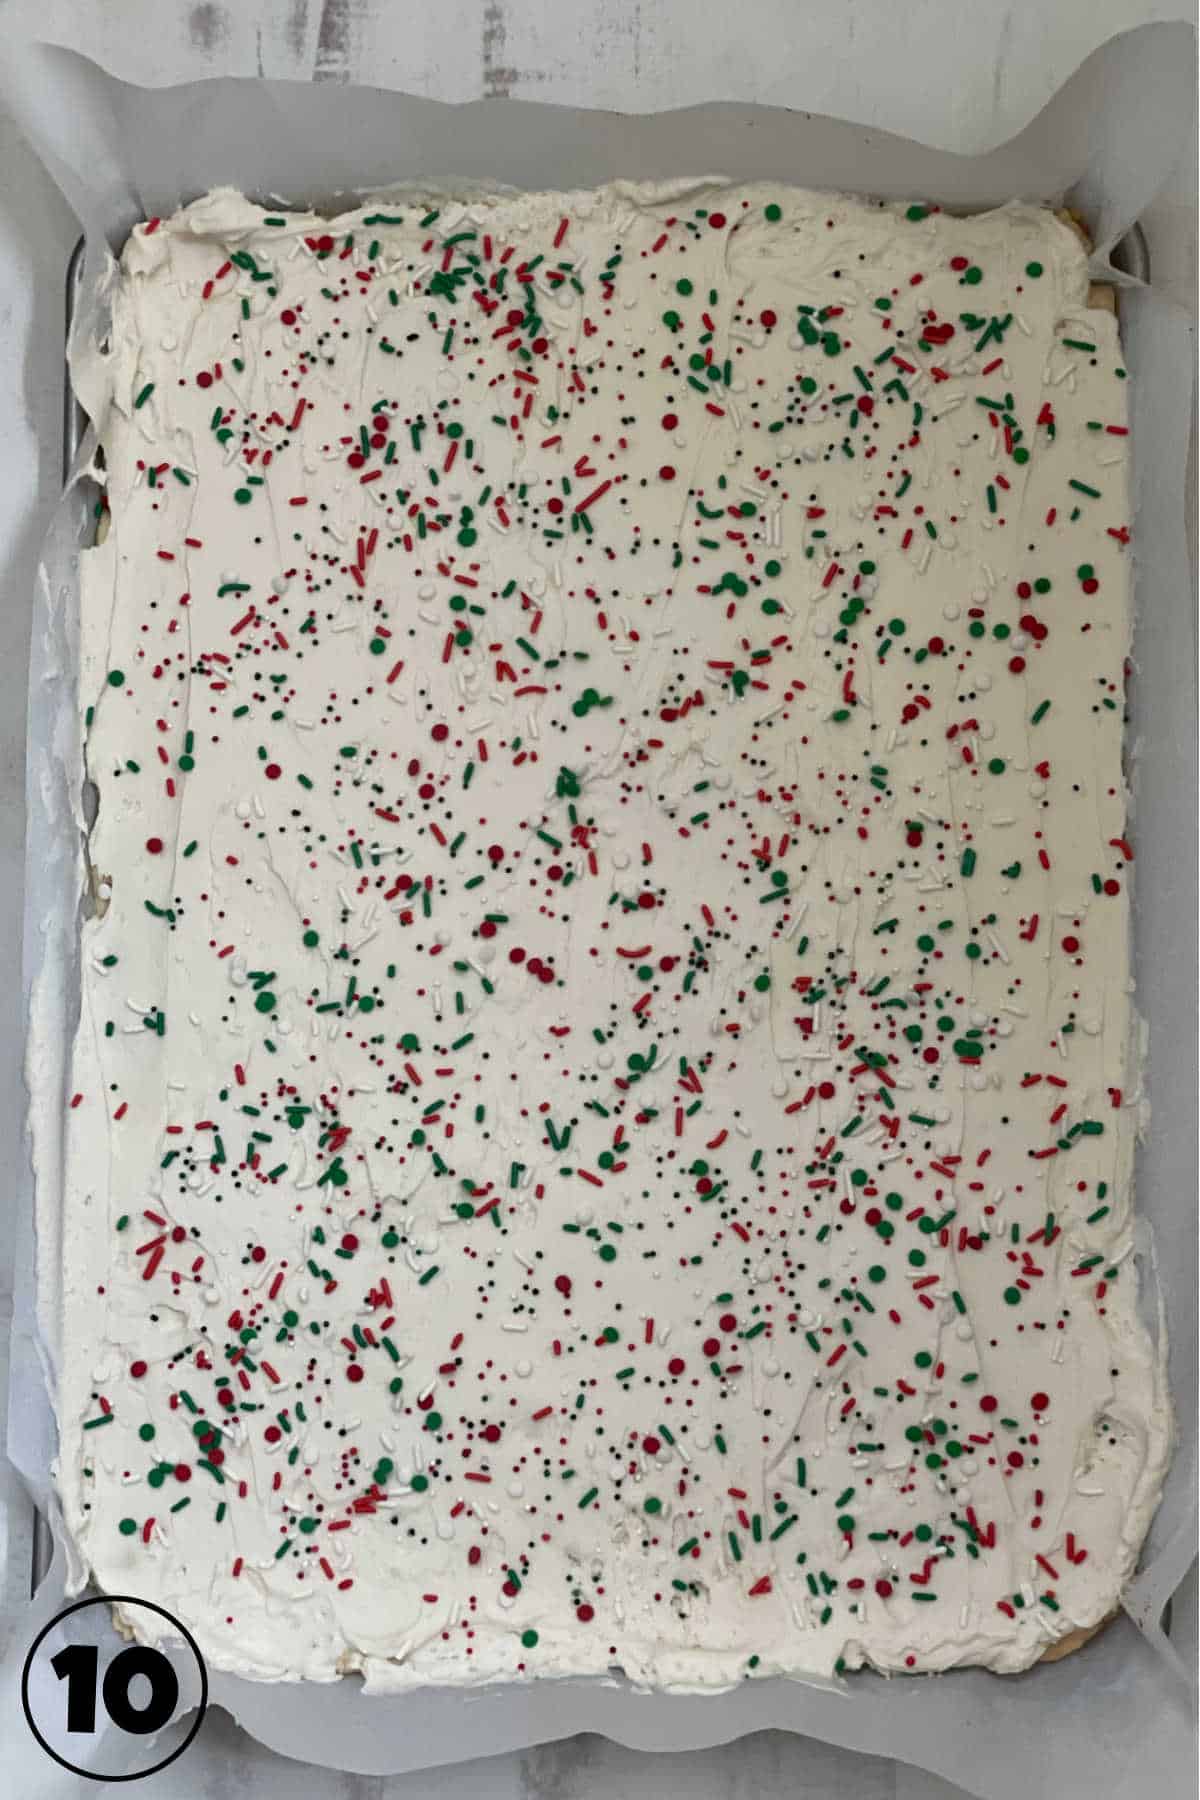 Sugar cookie bars with white frosting and red and green sprinkles in a sheetpan.